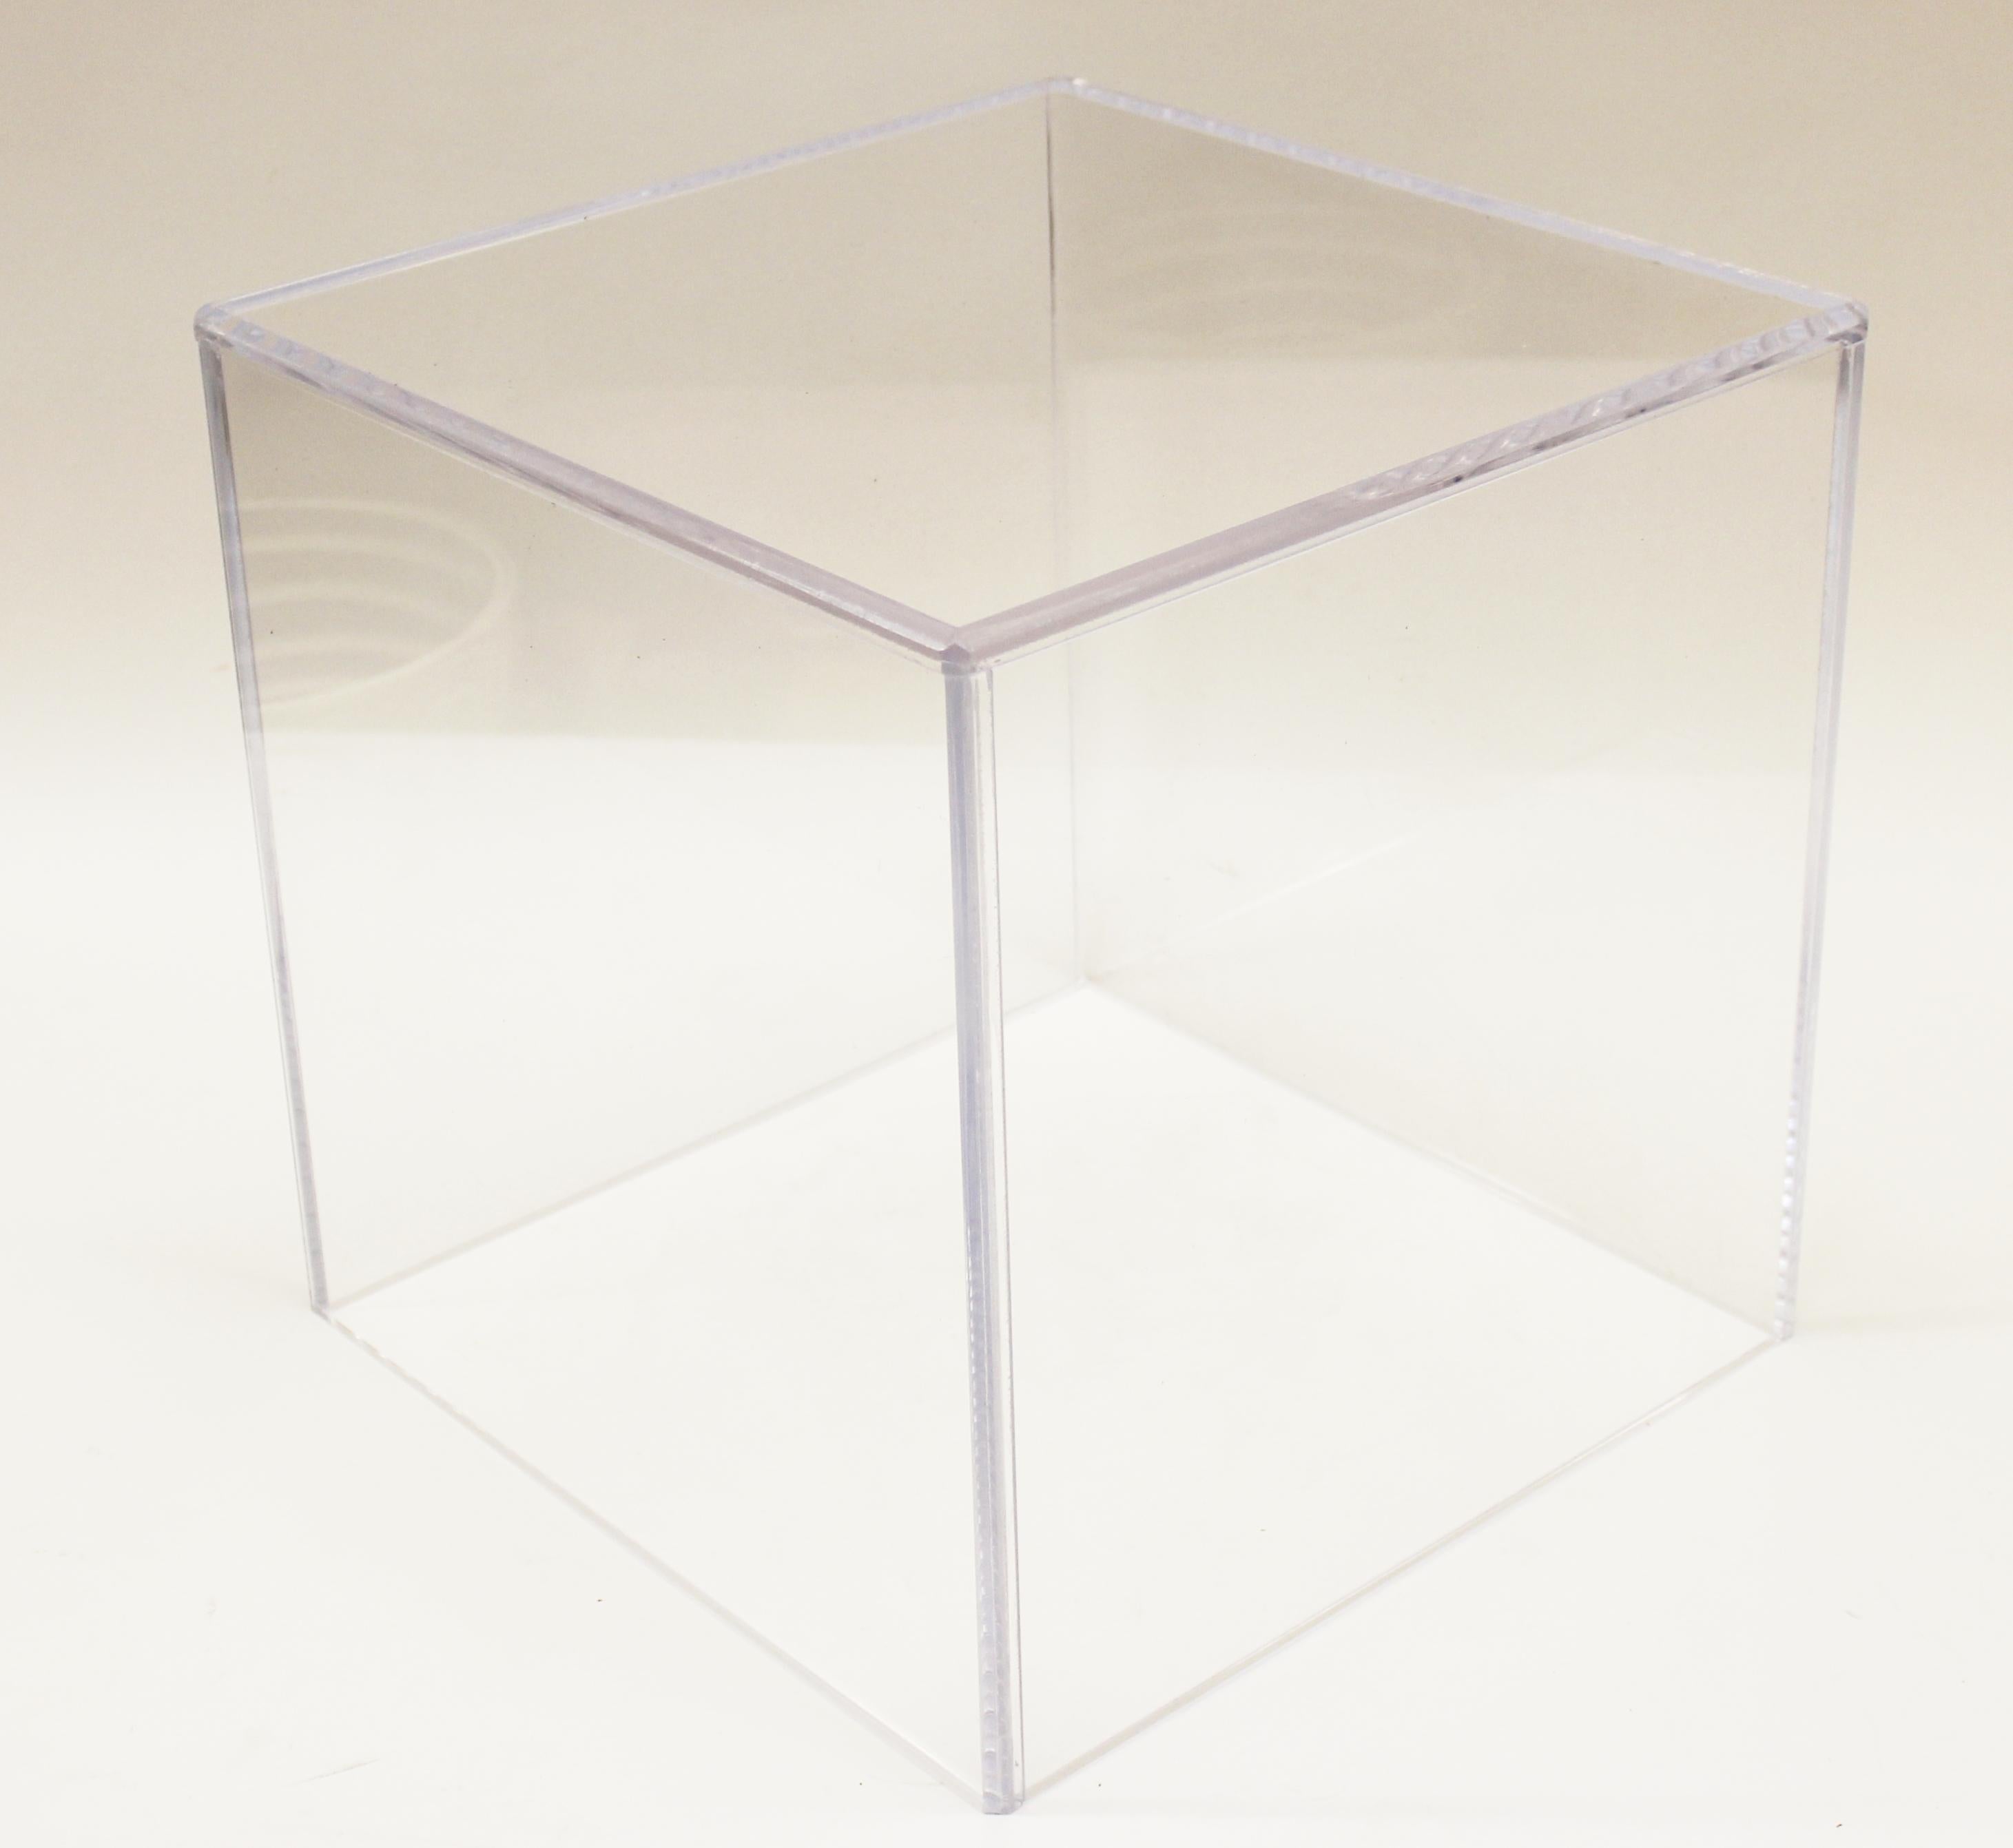 North American Modern Acrylic Display Pedestal Cubes or Side Tables